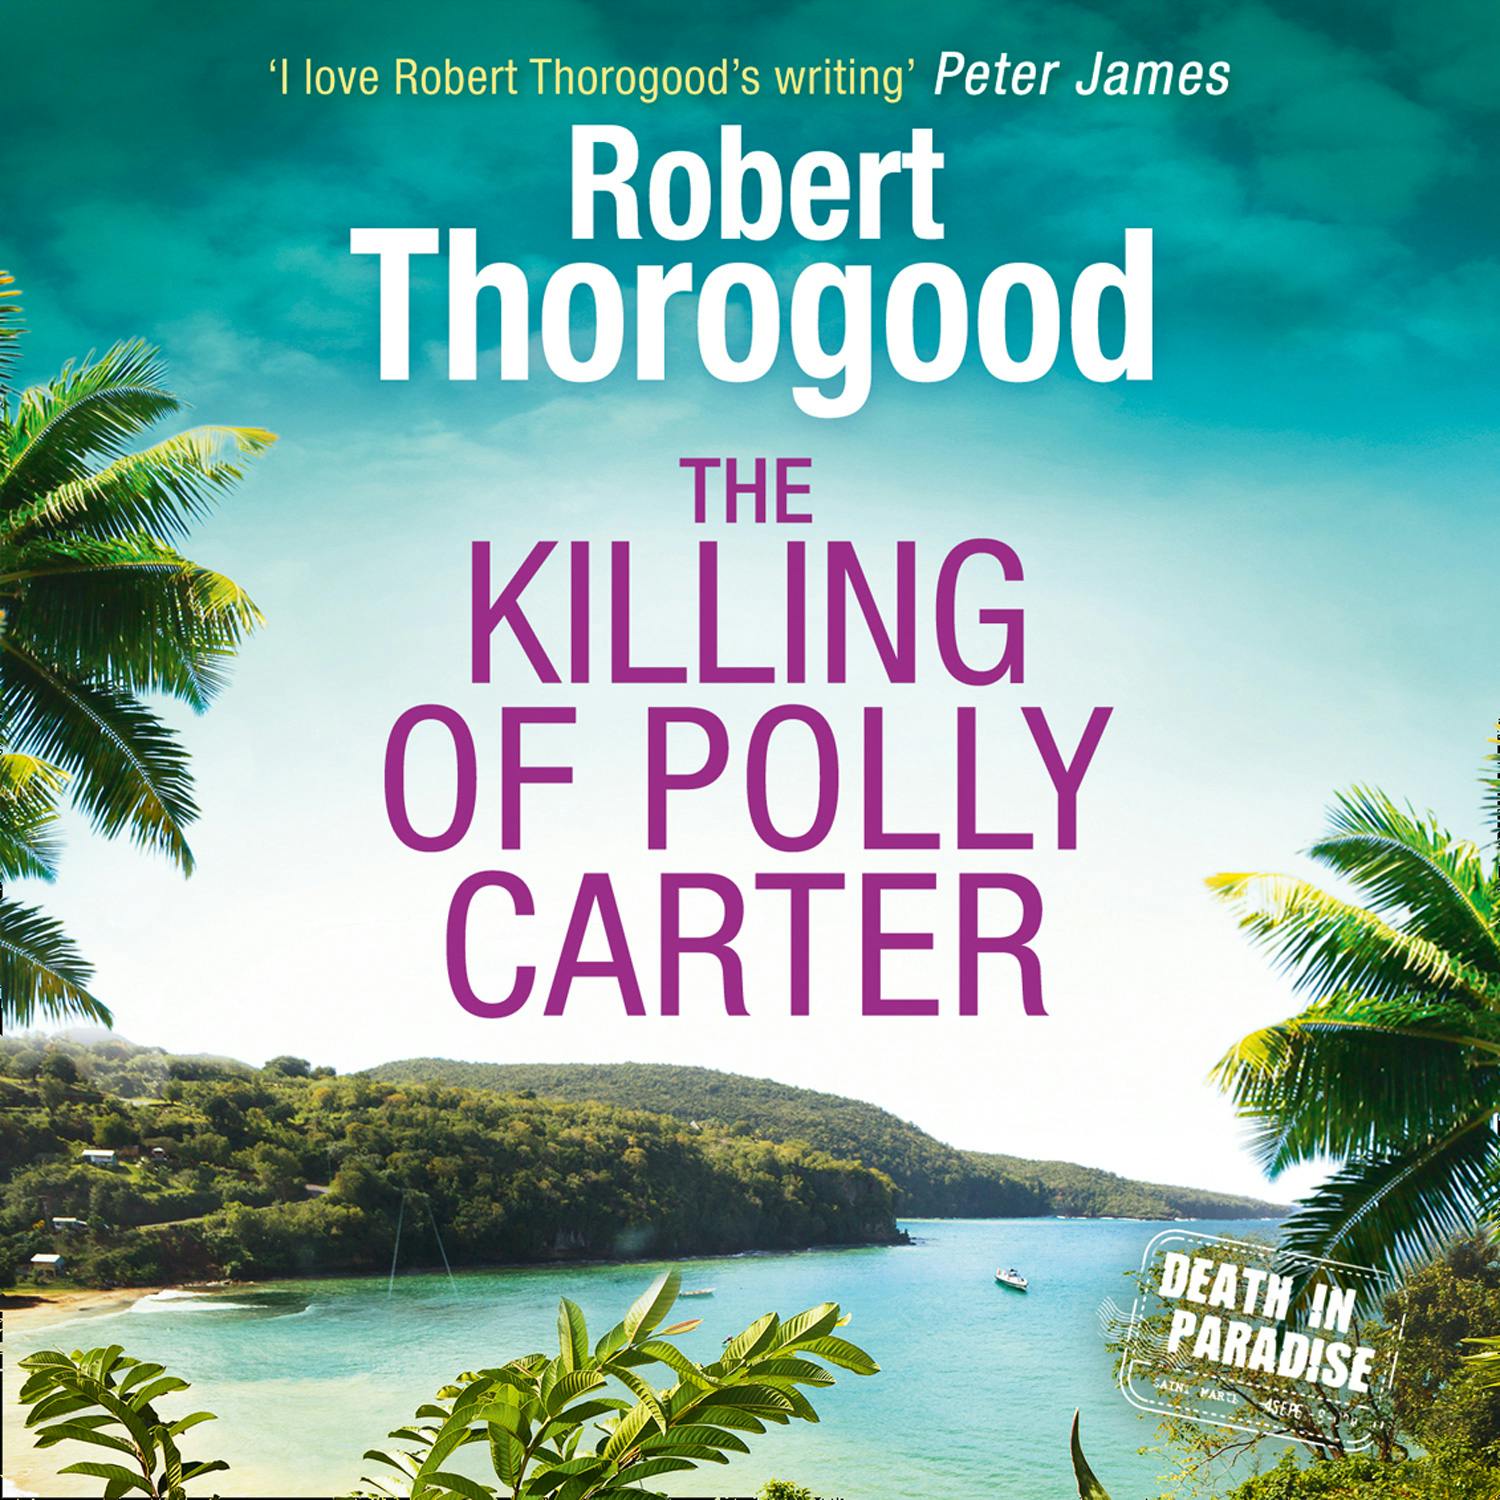 The Killing Of Polly Carter (A Death in Paradise Mystery, Book 2) - Robert Thorogood